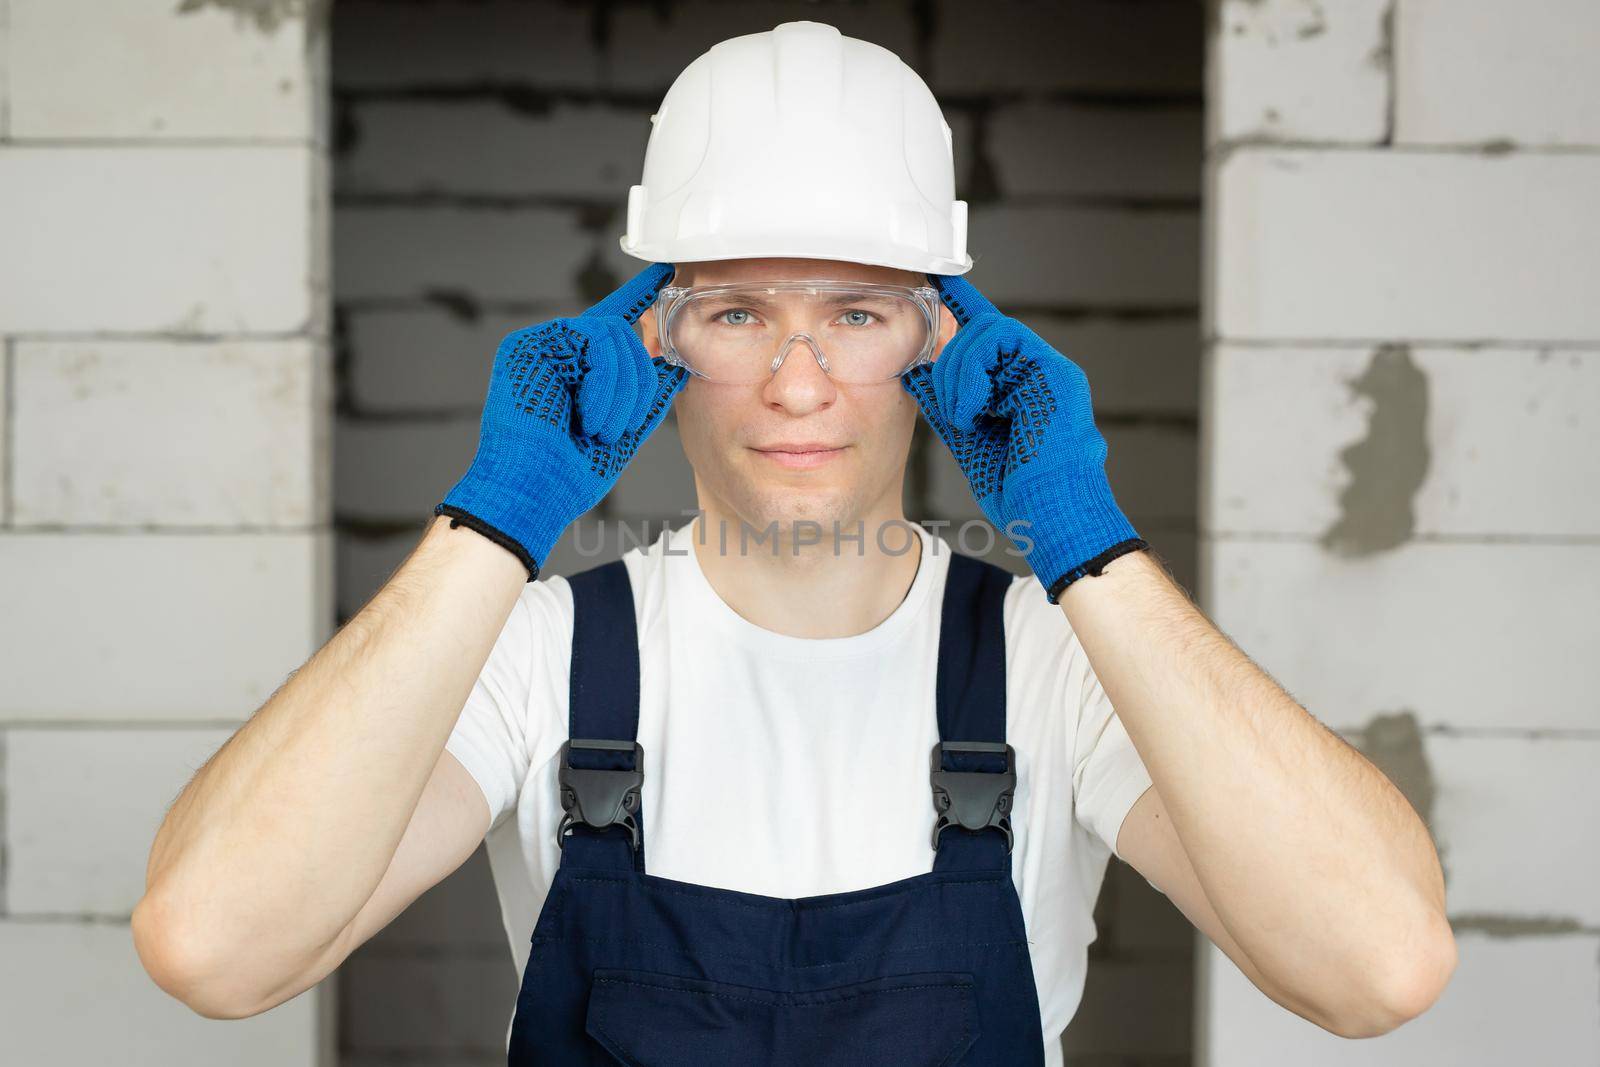 Handyman in a white T-shirt, a combination jacket and a hard hat puts on safety glasses.